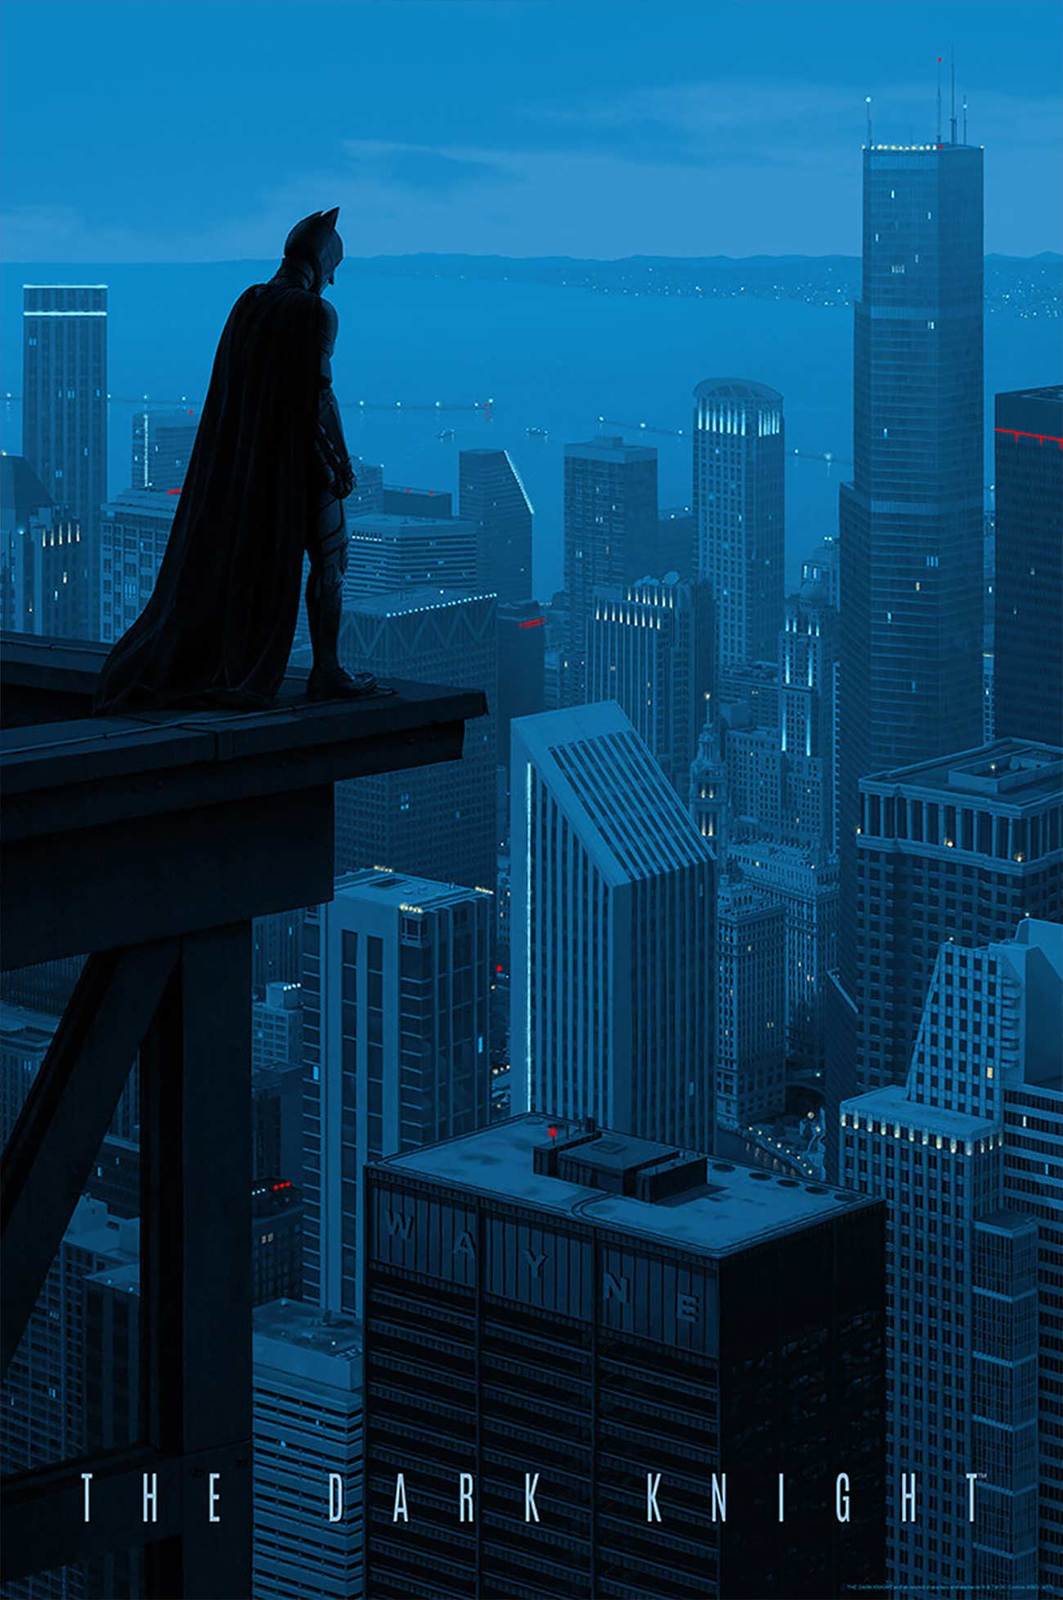 The Dark Knight by Rory Kurtz Timed Screen Print Framed For Sale Online